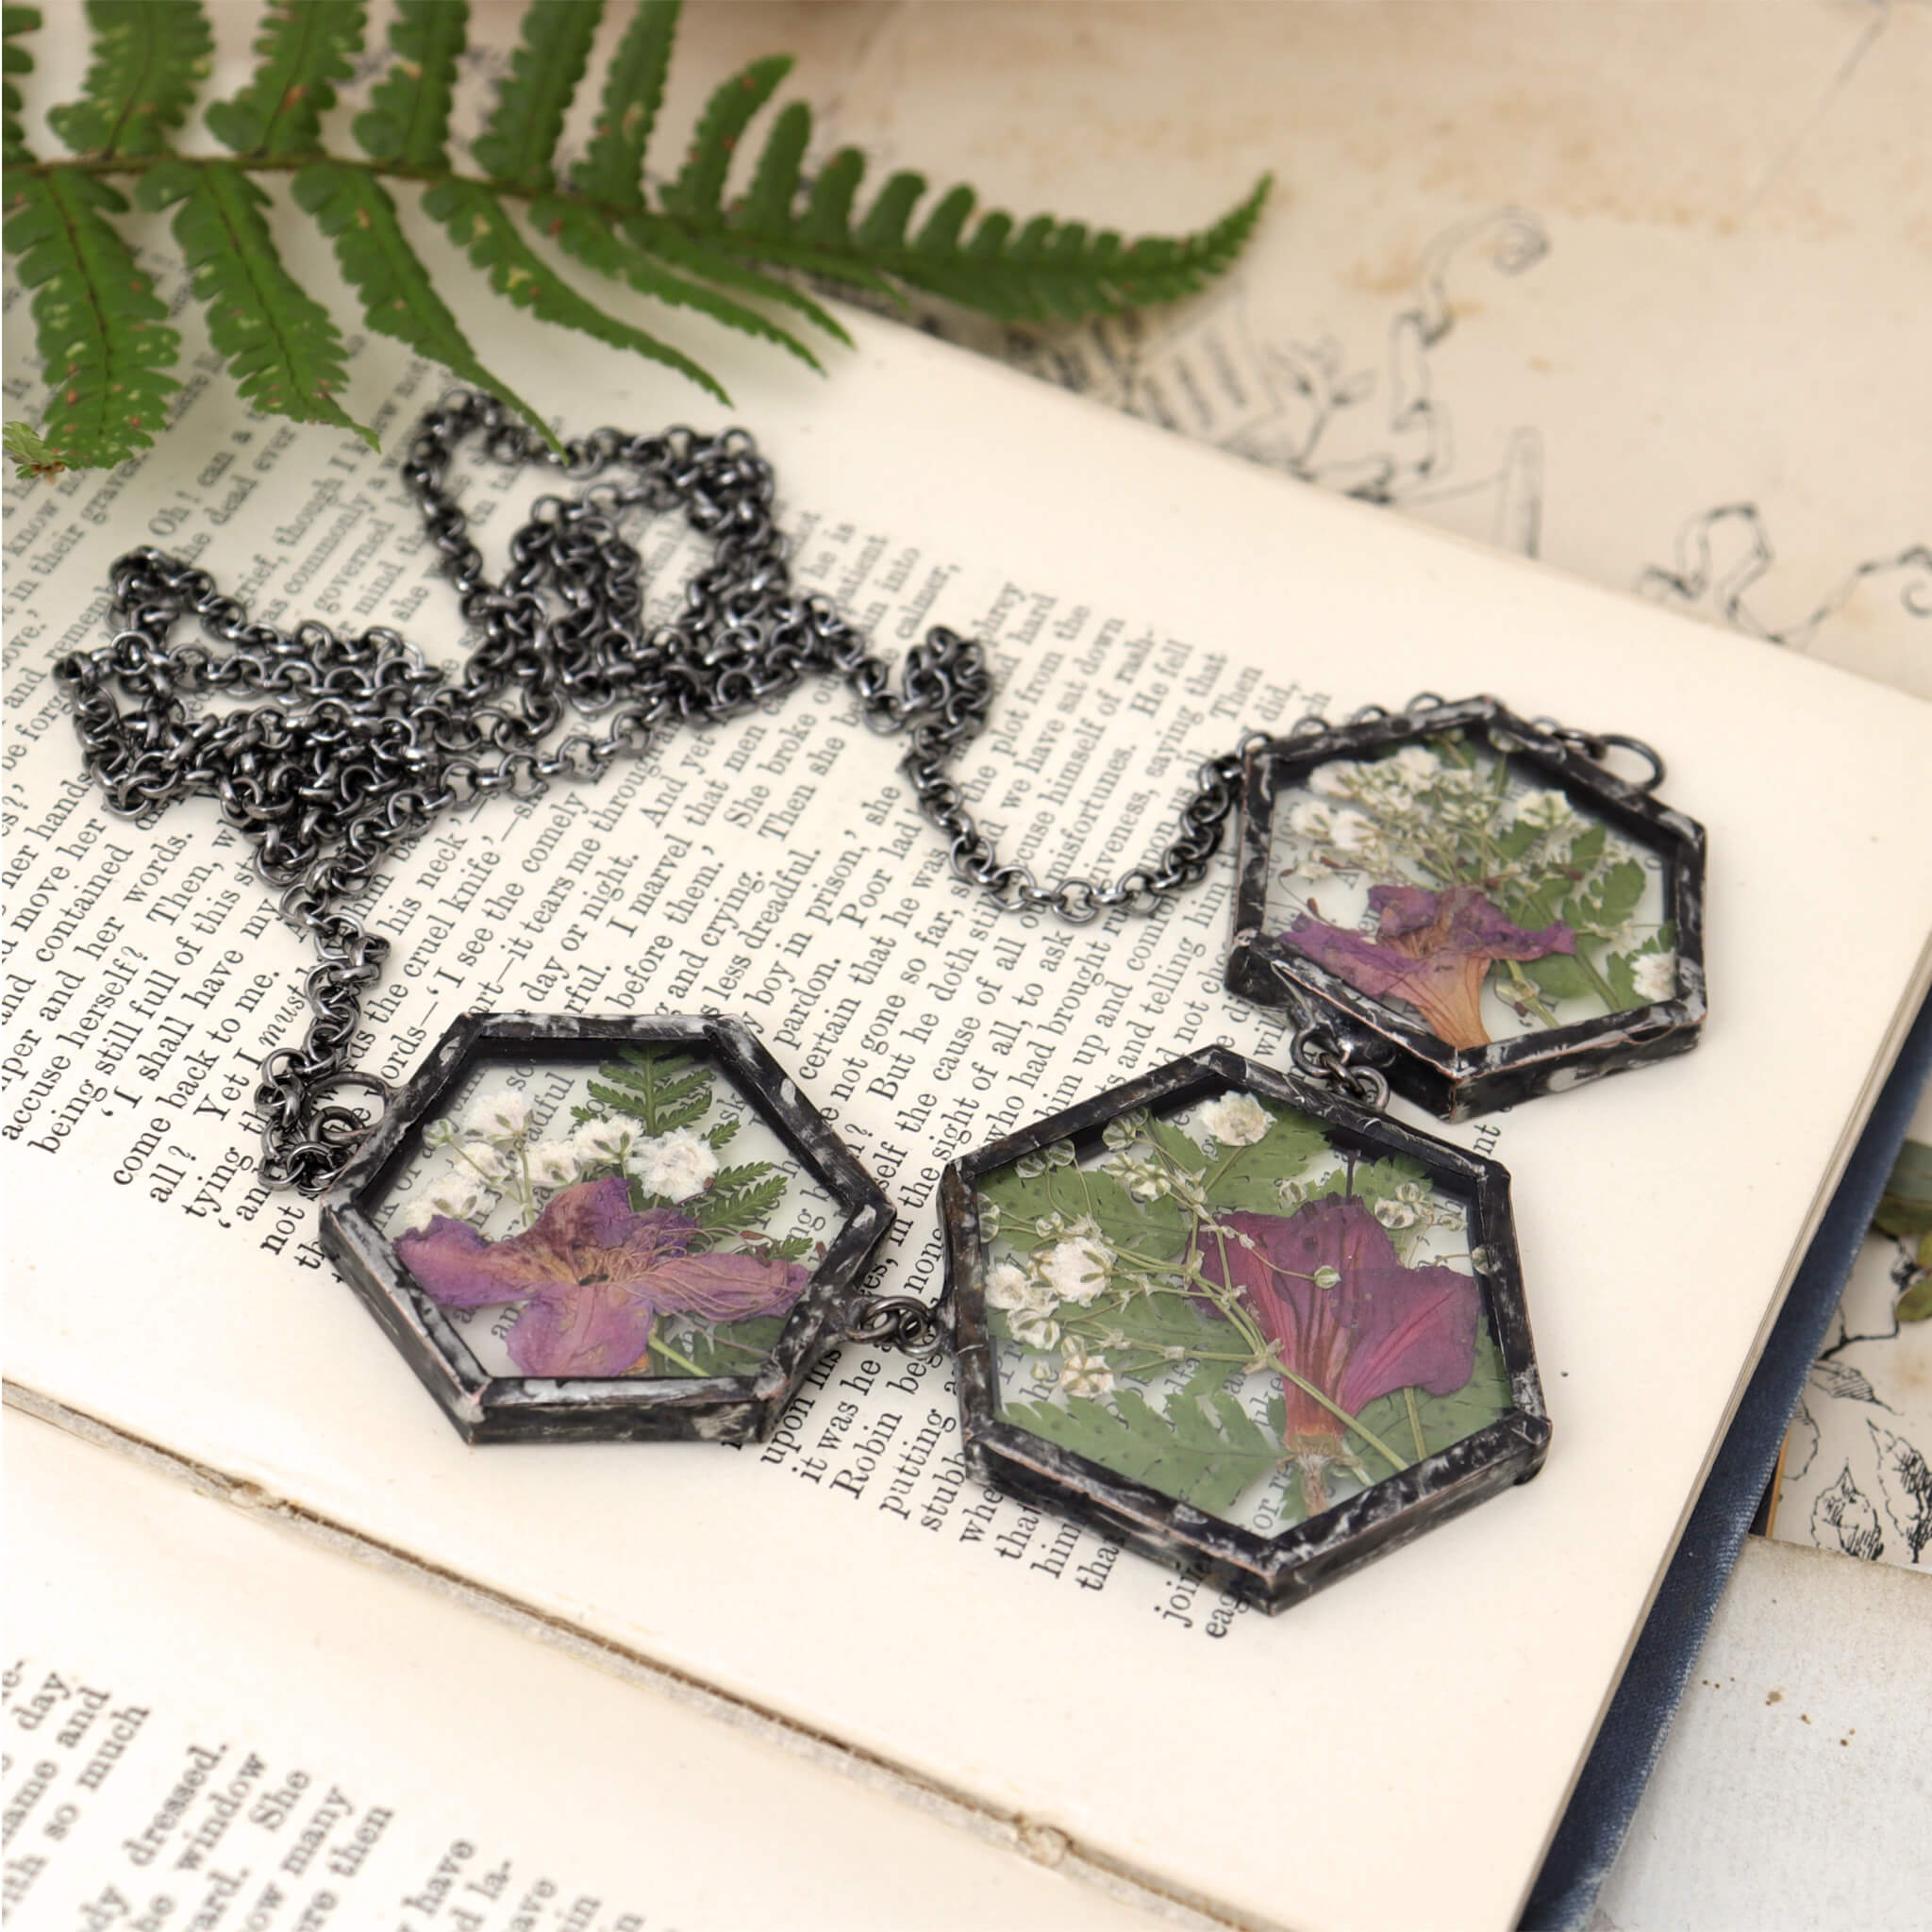  azalea and fern three glass panel necklace lying on an open book